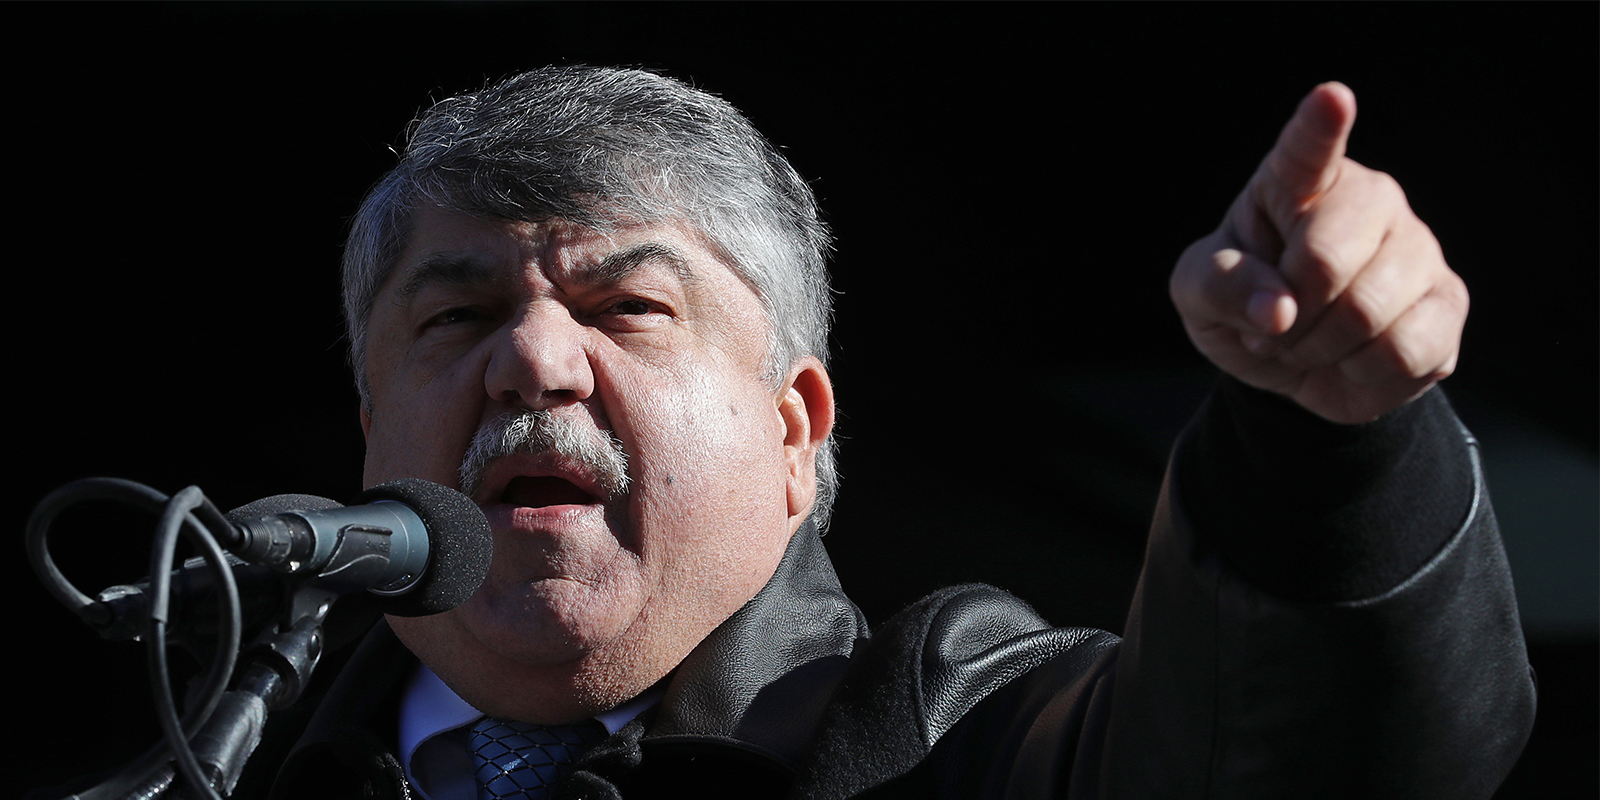 AFSCME honors Richard Trumka, ‘one of the fiercest advocates for working people ever’ 